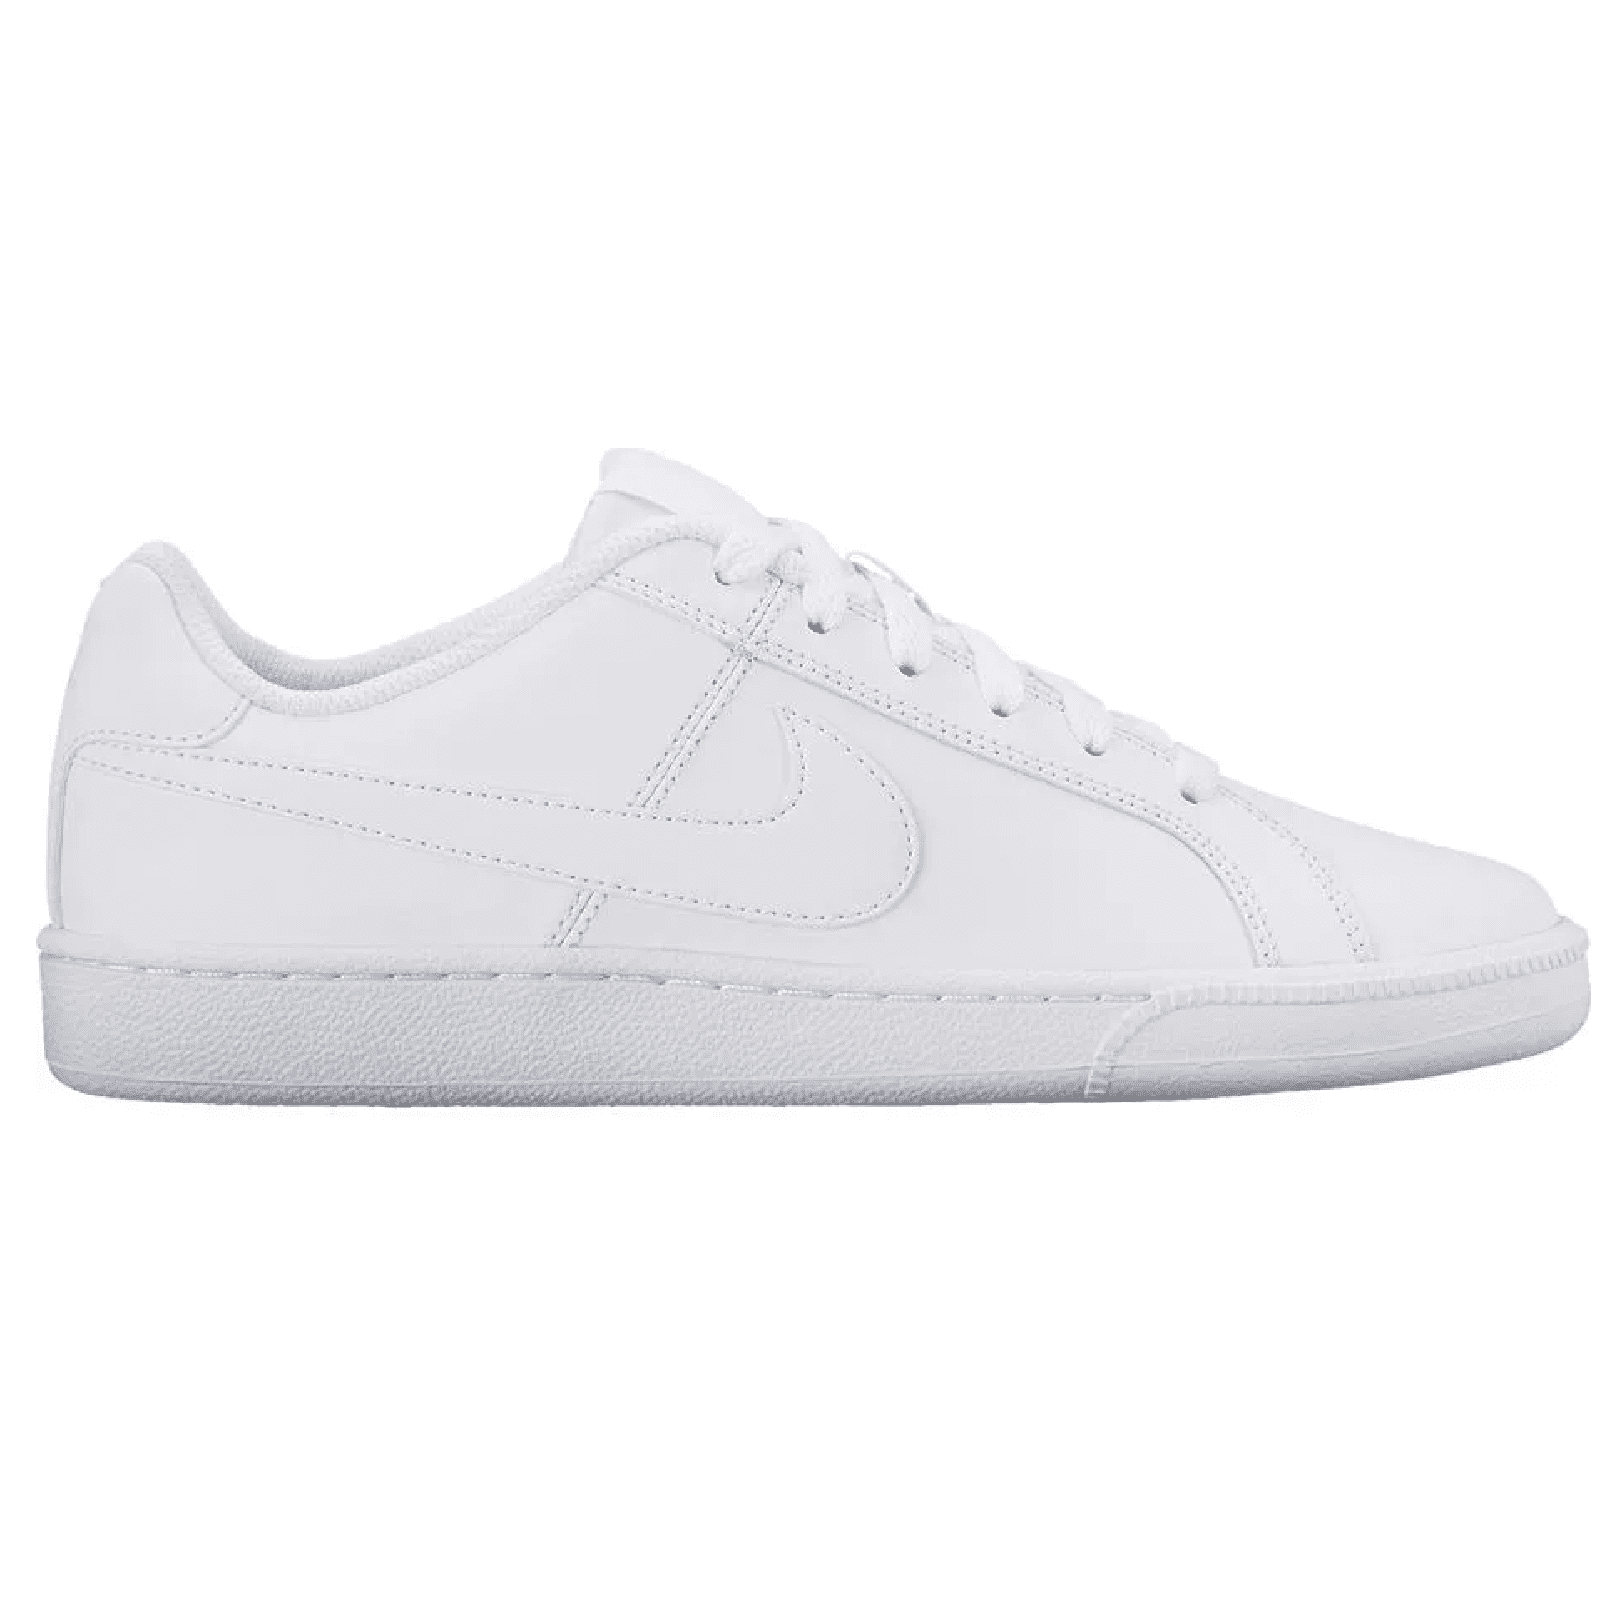 Nike Court Royale 749867-105 Women's White Leather Athletic Trainer ...